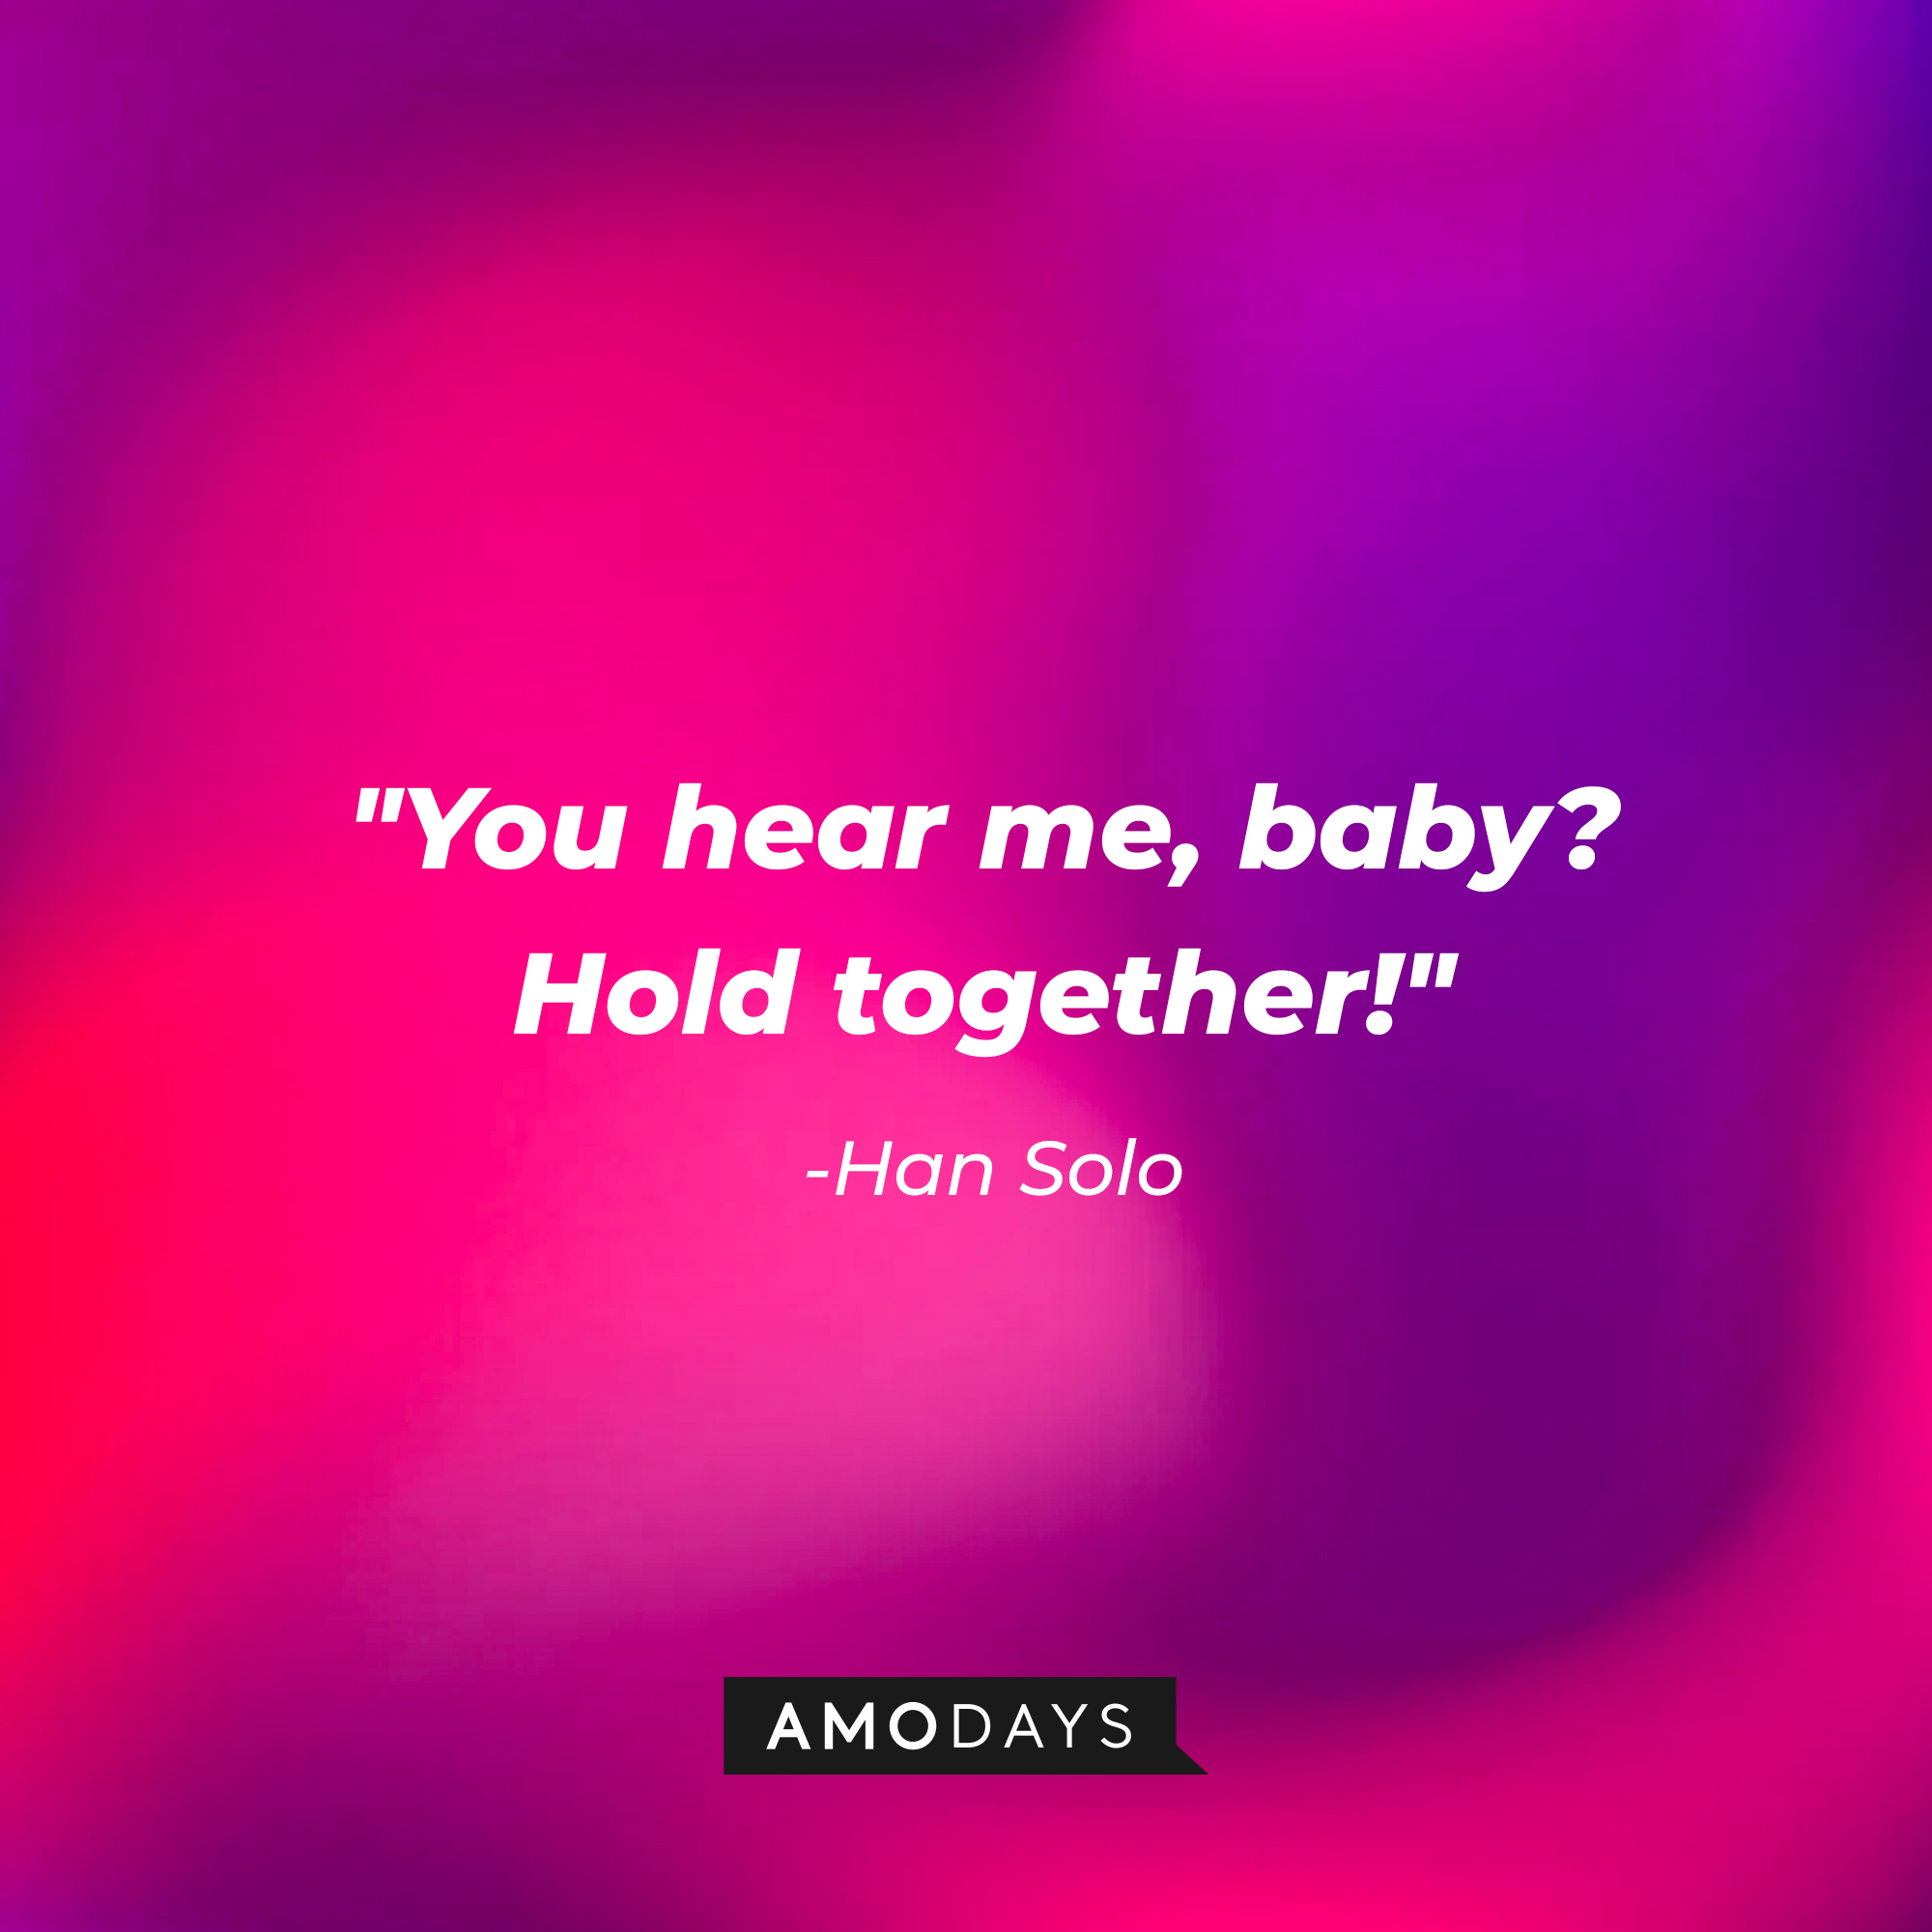 Han Solo’s quote: "You hear me, baby? Hold together!" | Source: AmoDays